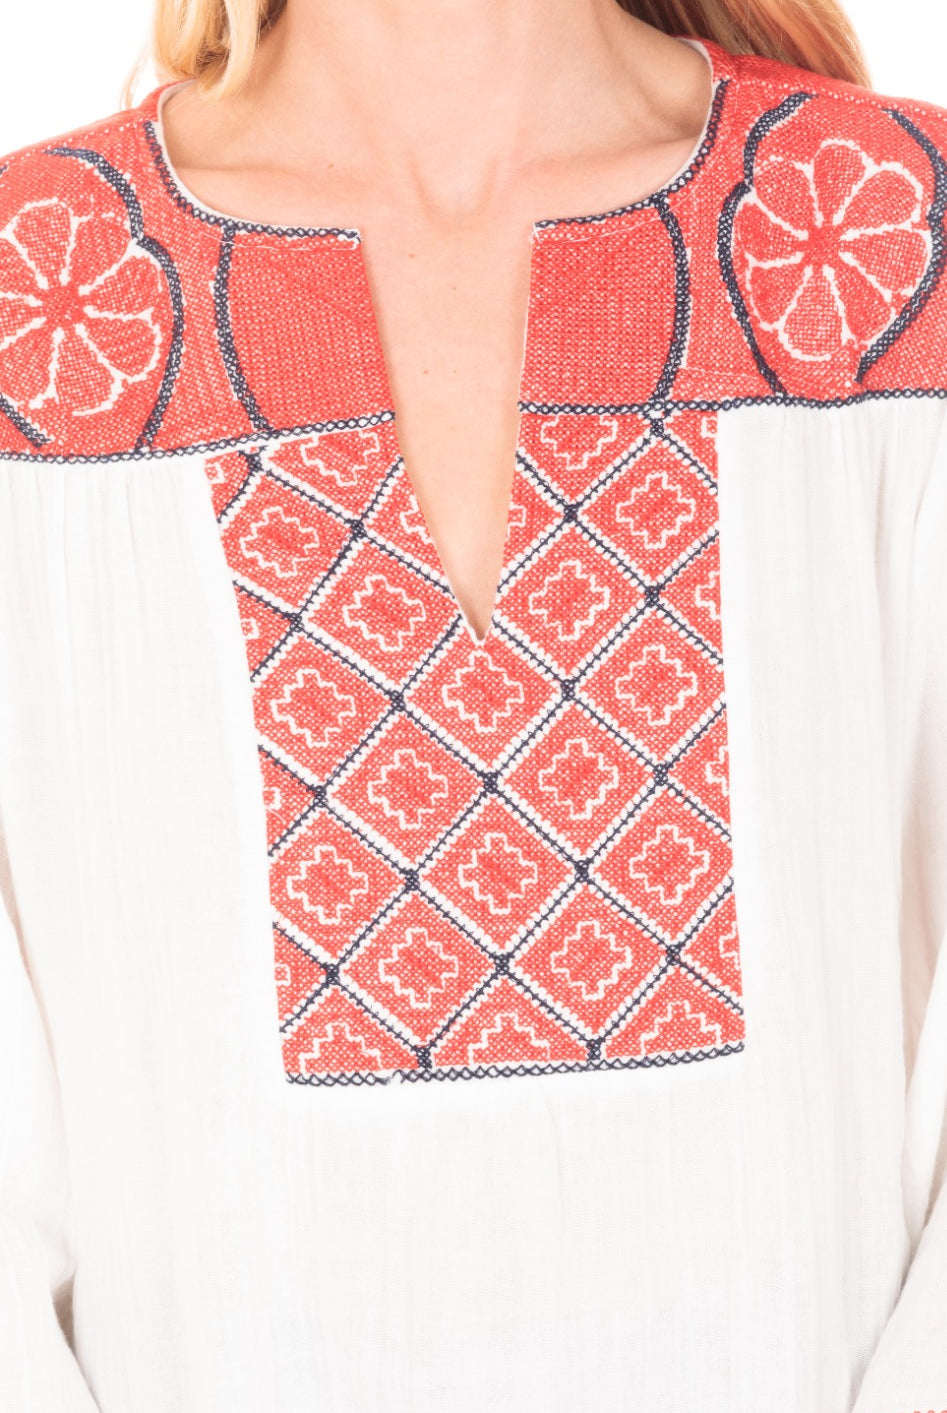 Pull/Over With Red Medallion Embroidery Neck-1 APNY